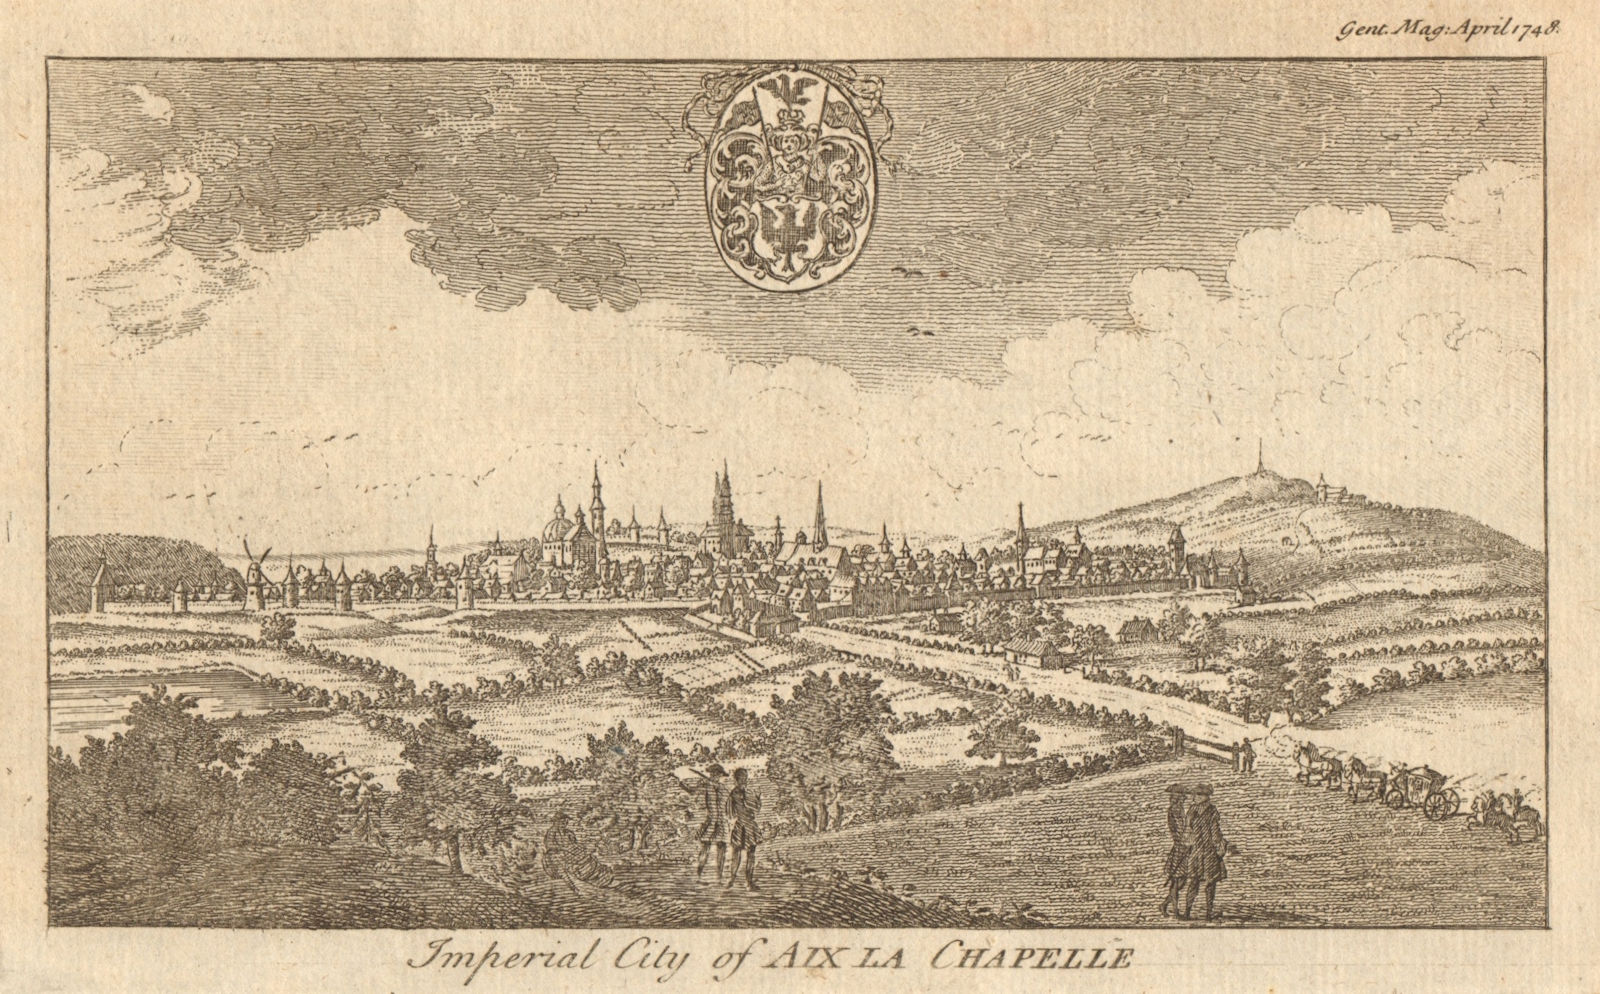 Imperial City of Aix La Chapelle. View of Aachen, Germany 1748 old print